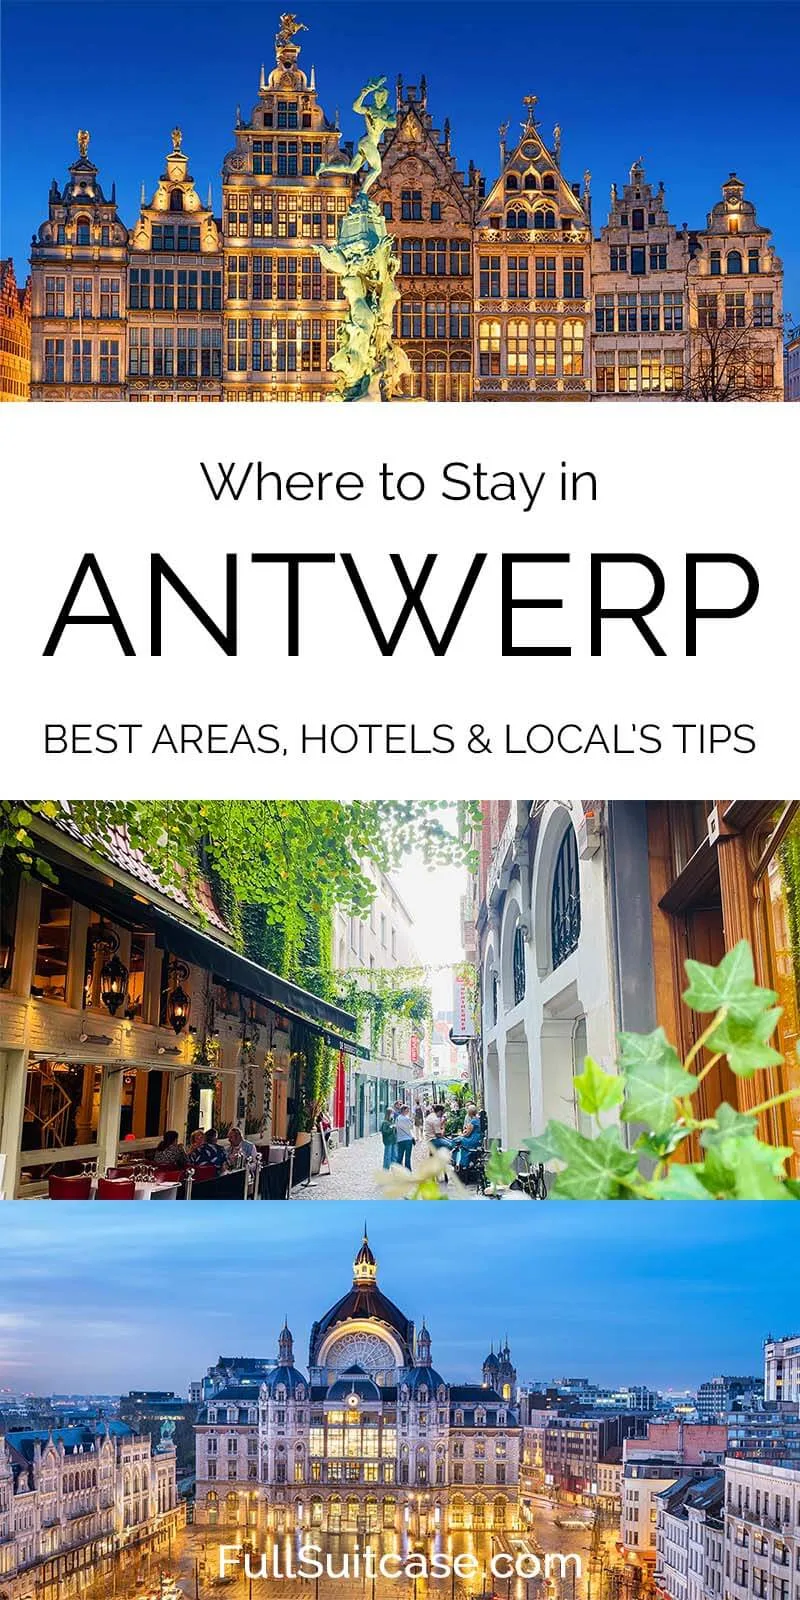 Where to stay in Antwerp - best neighborhoods, hotels, and tips by a local